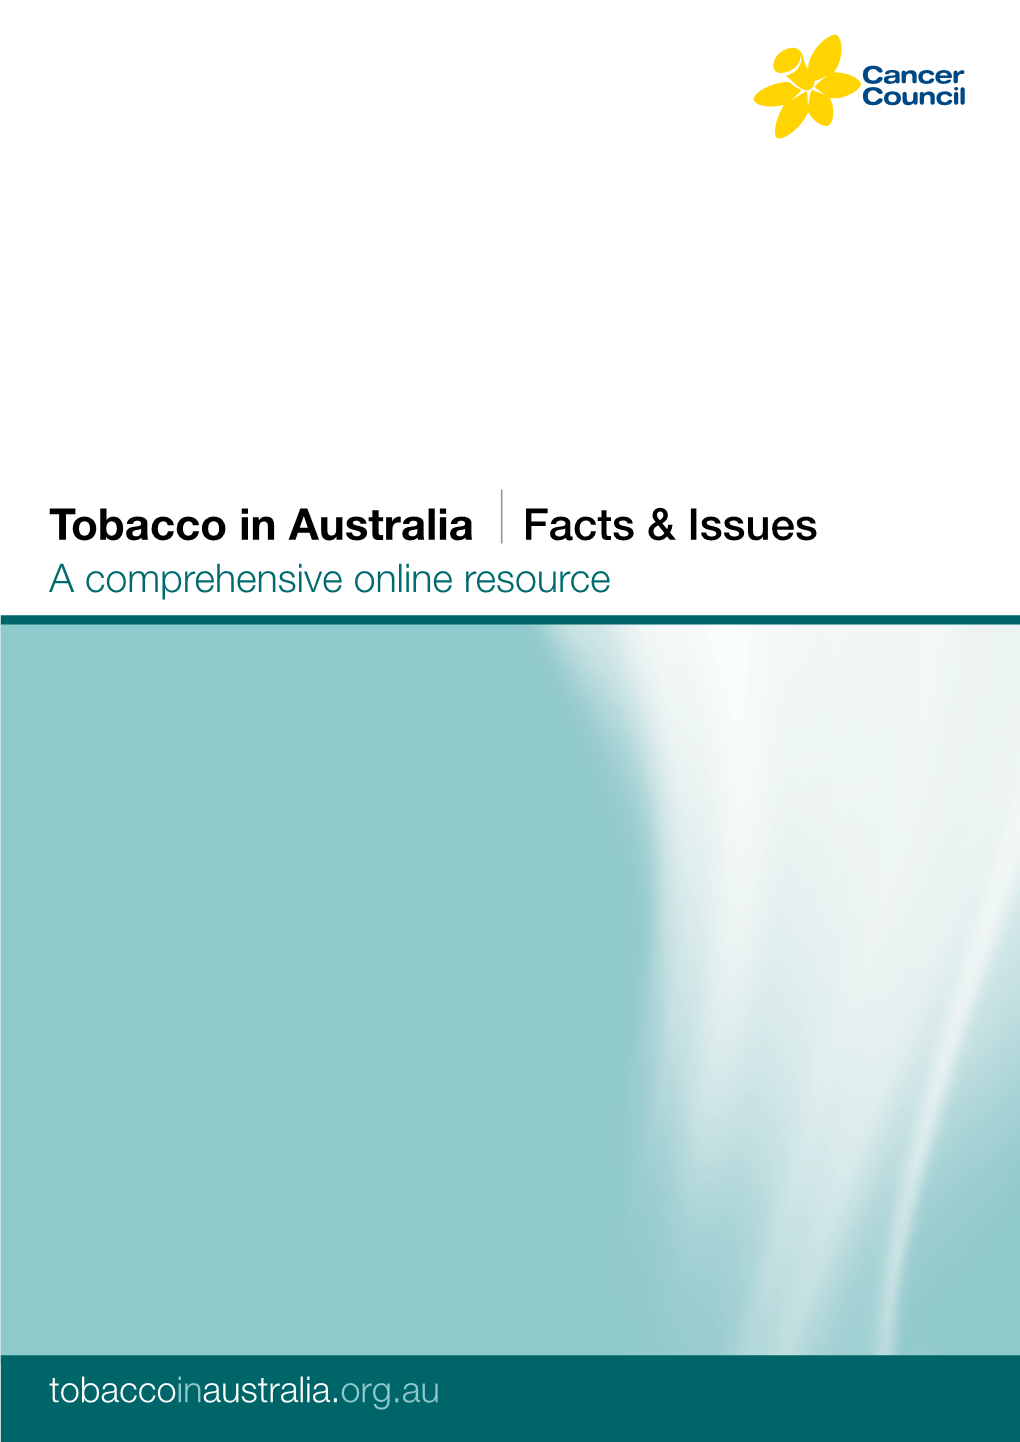 Chapter 18 Potential for Harm Reduction in Tobacco Control Chapter 19 the WHO Framework Convention on Tobacco Control Appendix 1 Useful Weblinks to Tobacco Resources